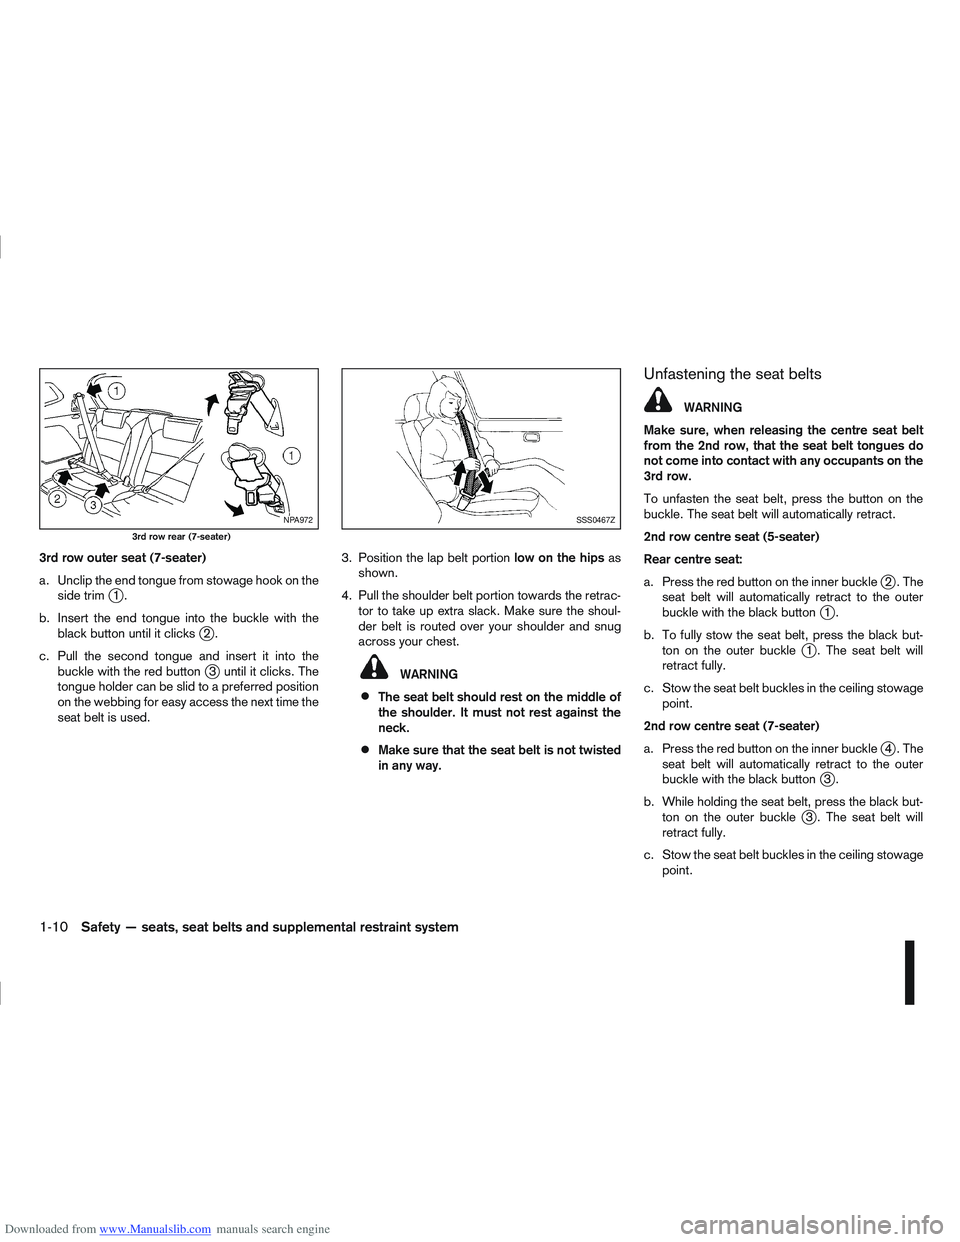 NISSAN QASHQAI 2007 Owners Manual Downloaded from www.Manualslib.com manuals search engine 3rd row outer seat (7-seater)
a. Unclip the end tongue from stowage hook on theside trim
j1.
b. Insert the end tongue into the buckle with the 